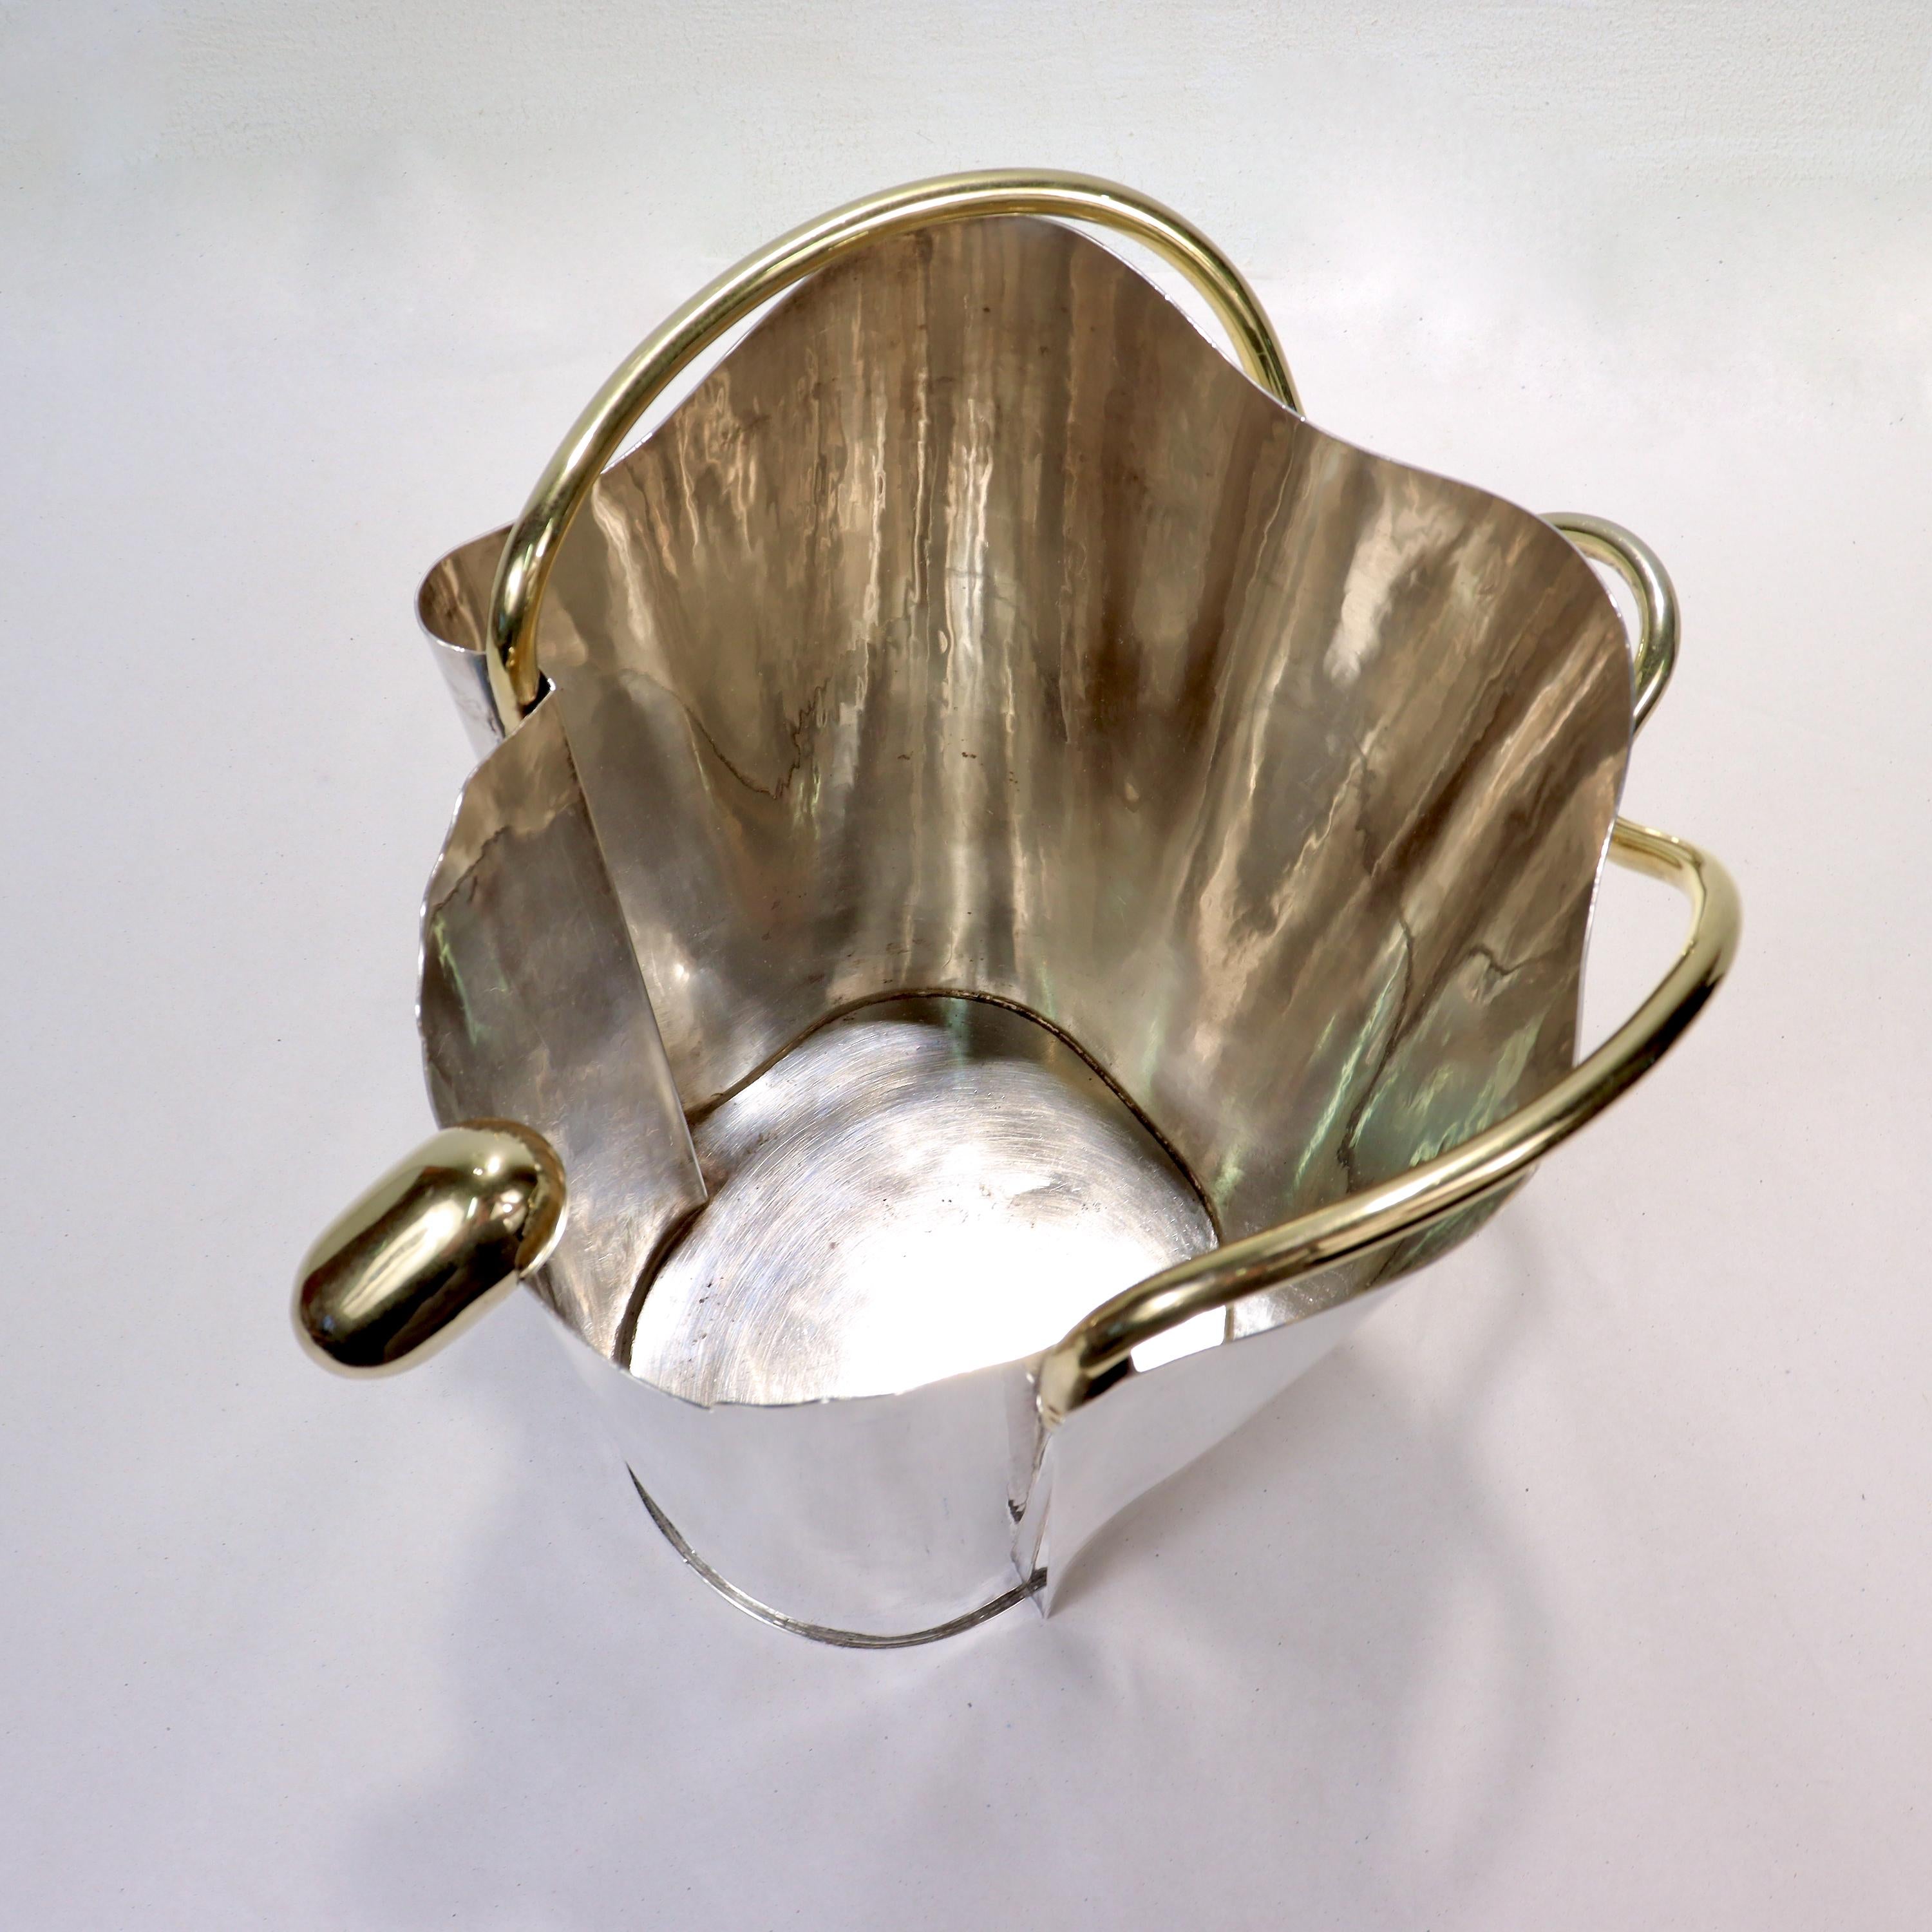 Modernist Sterling Silver Champagne / Ice Bucket by Borek Sipek for Cleto Munari For Sale 5